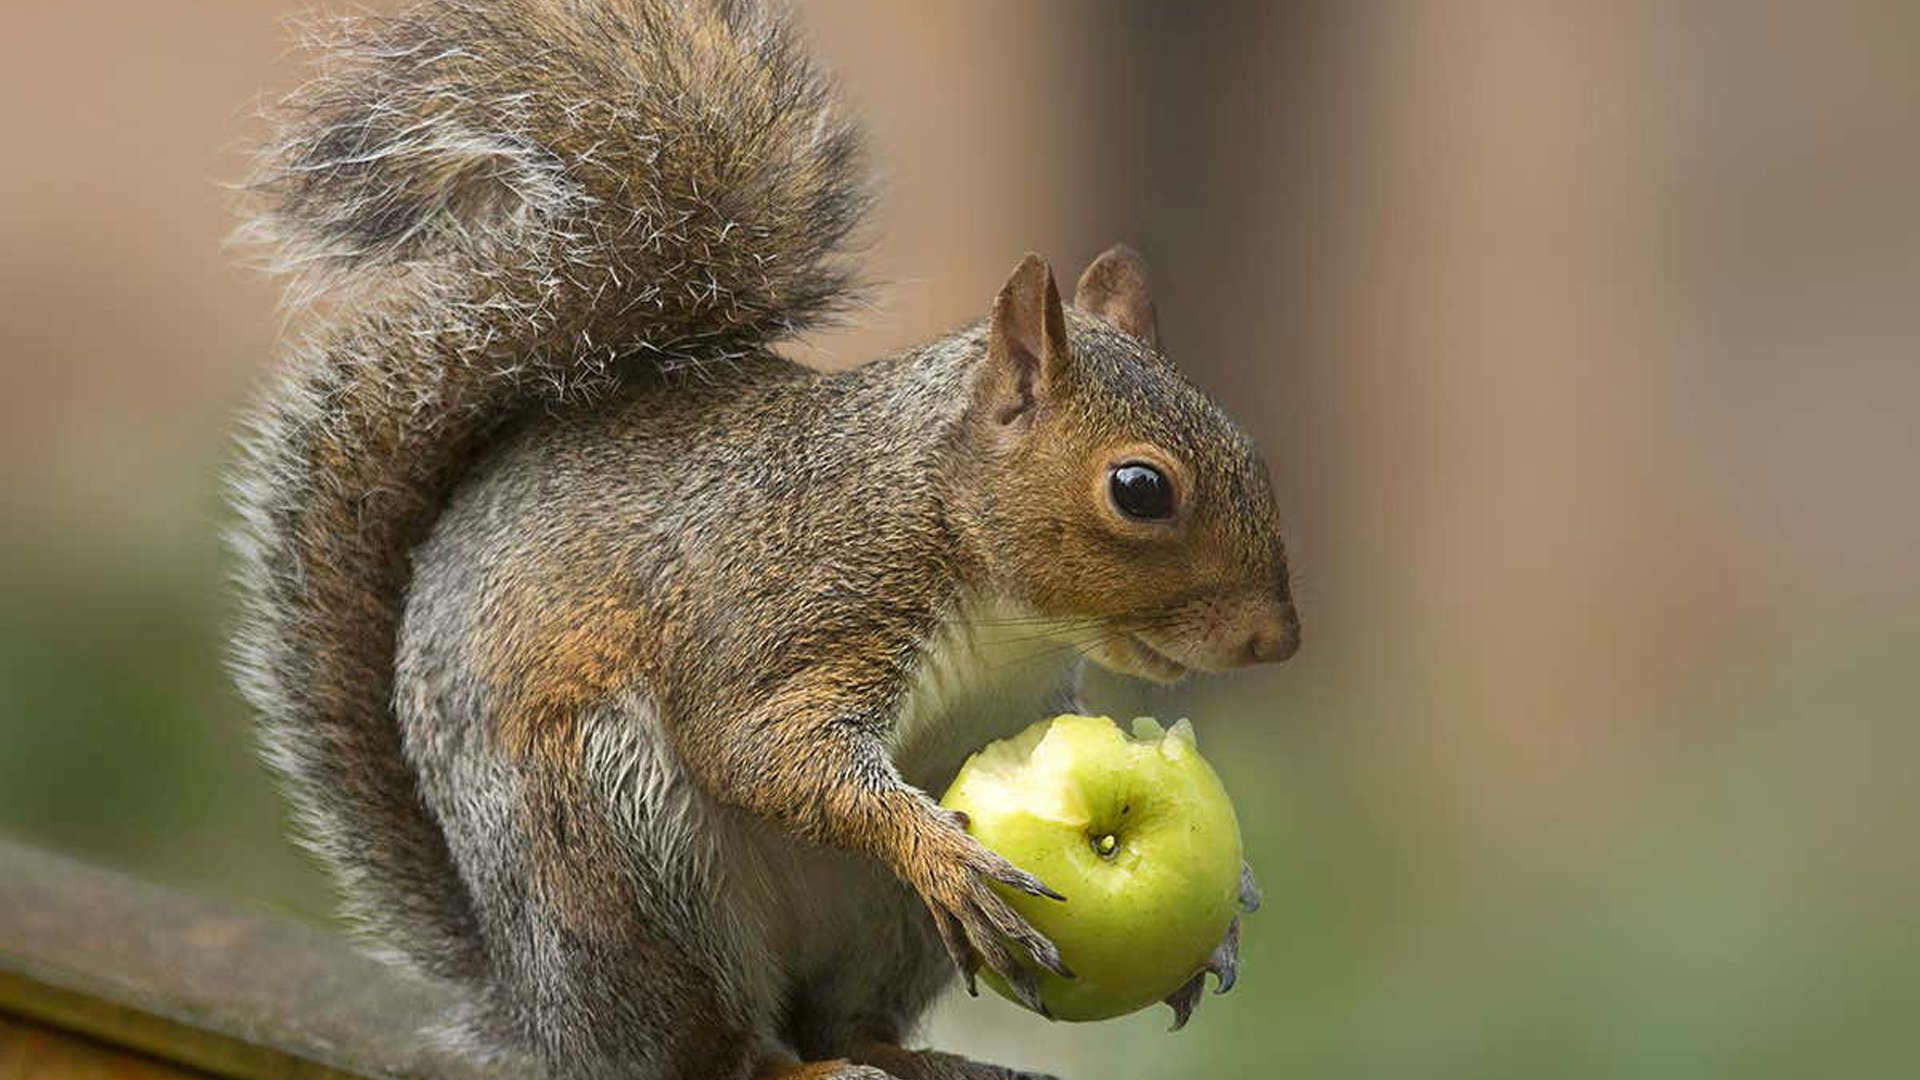 Fur Tail Squirrel Is Eating Green Fruit Standing In Blur Wallpaper HD Squirrel